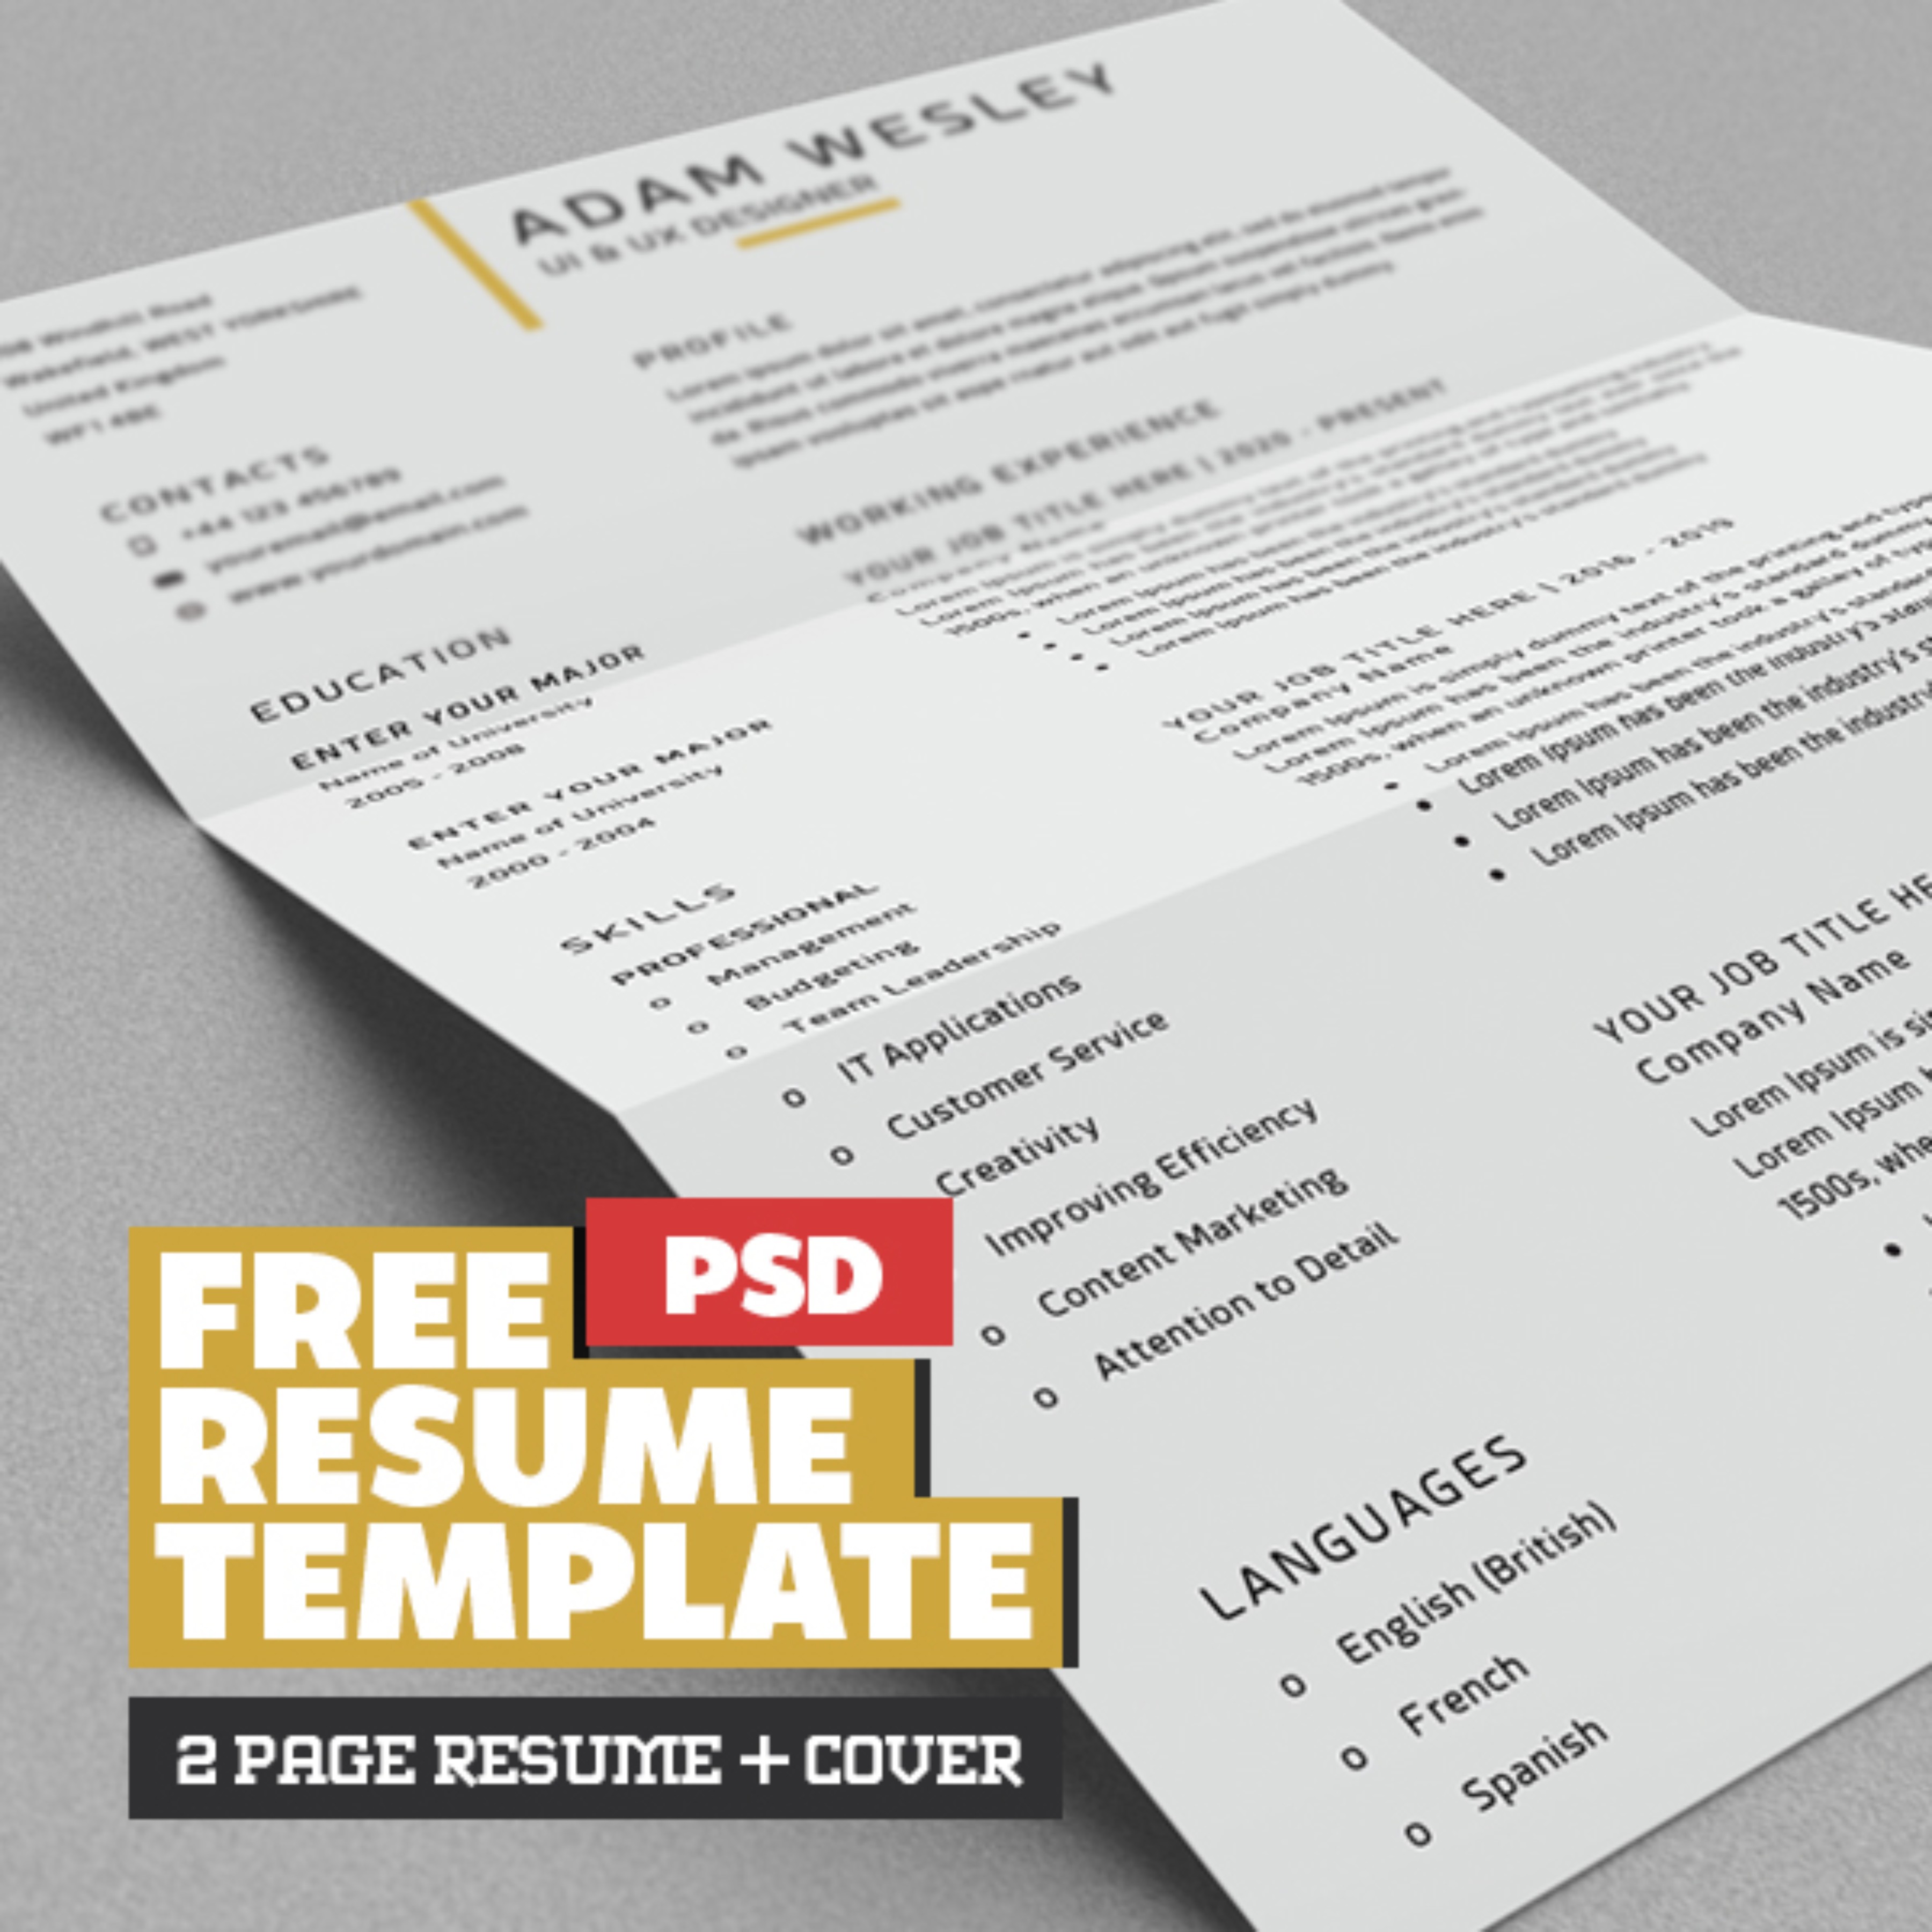 Free Simple Resume Template with Cover Letter + Business Card (PSD)